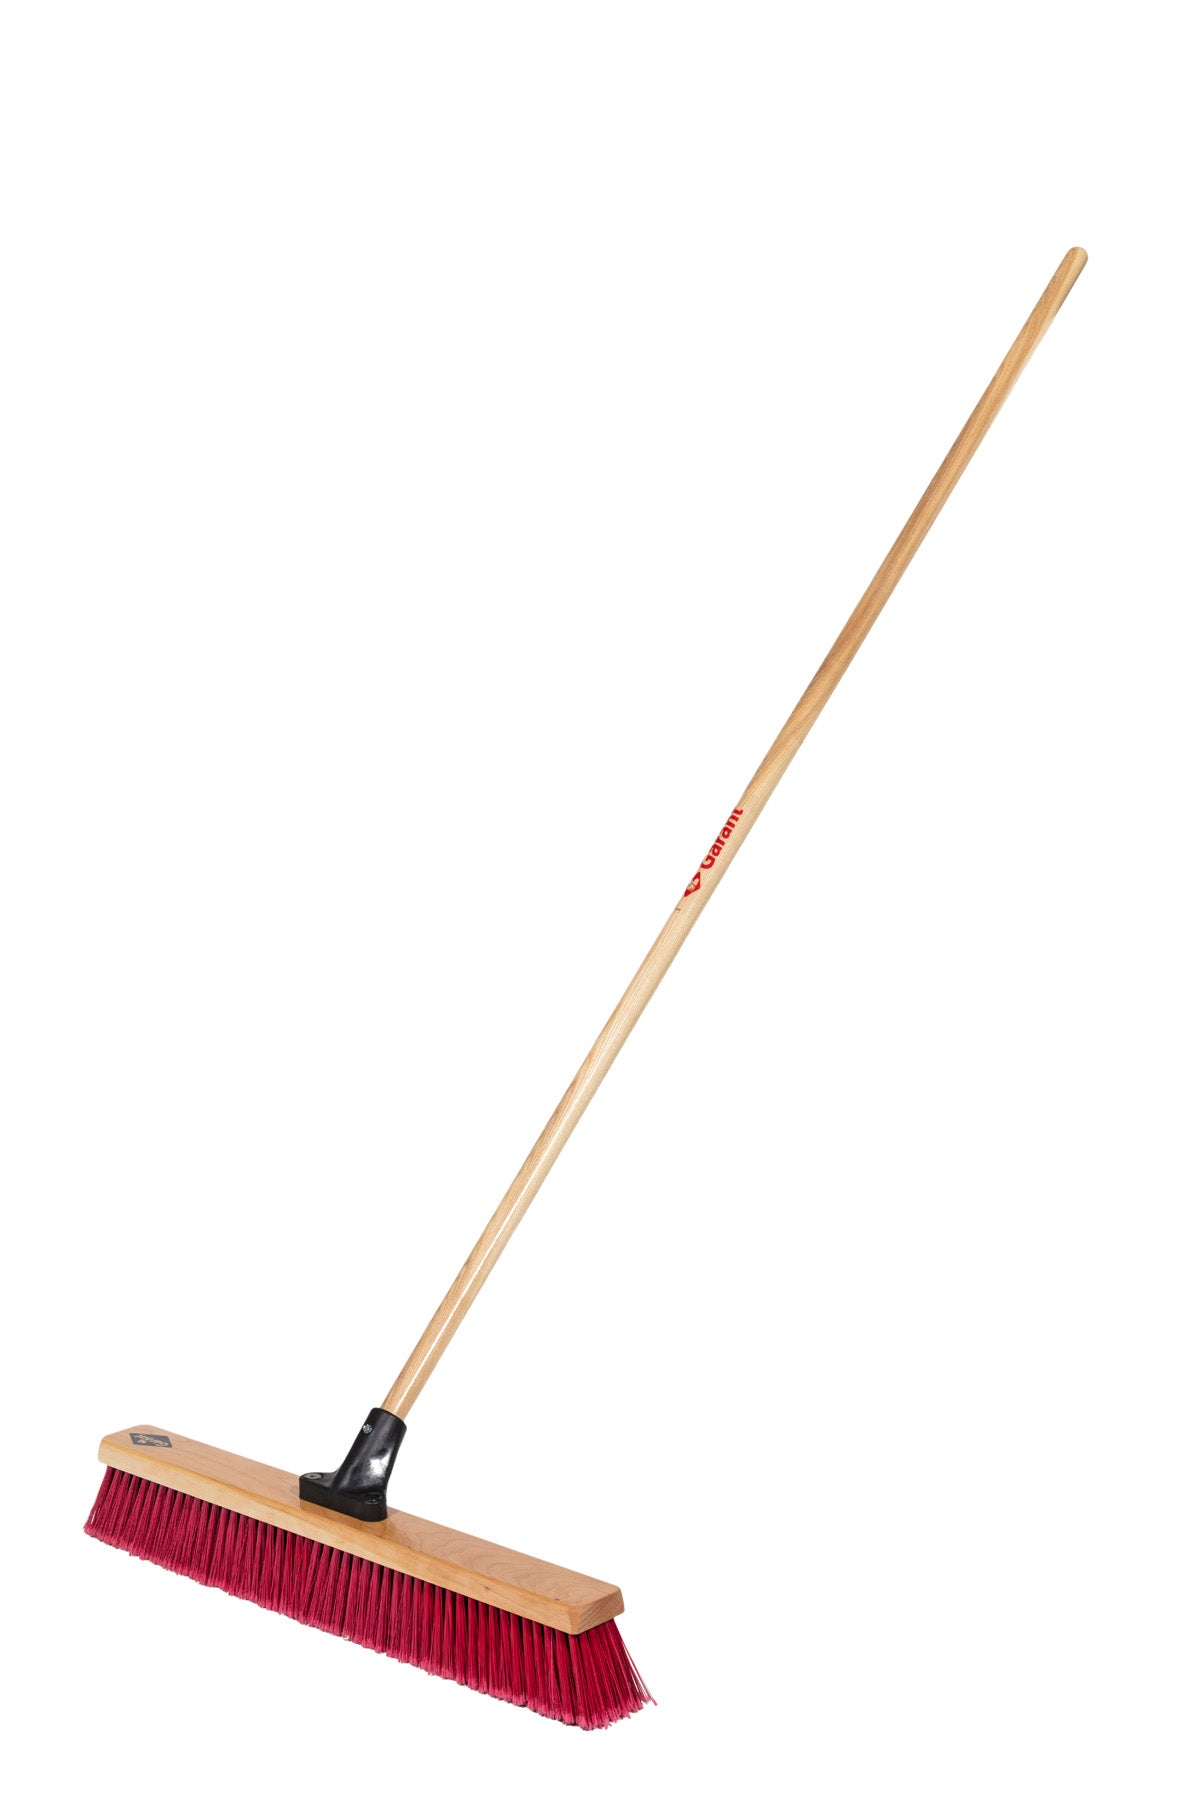 24-Inch Contractor push broom, multi-surface